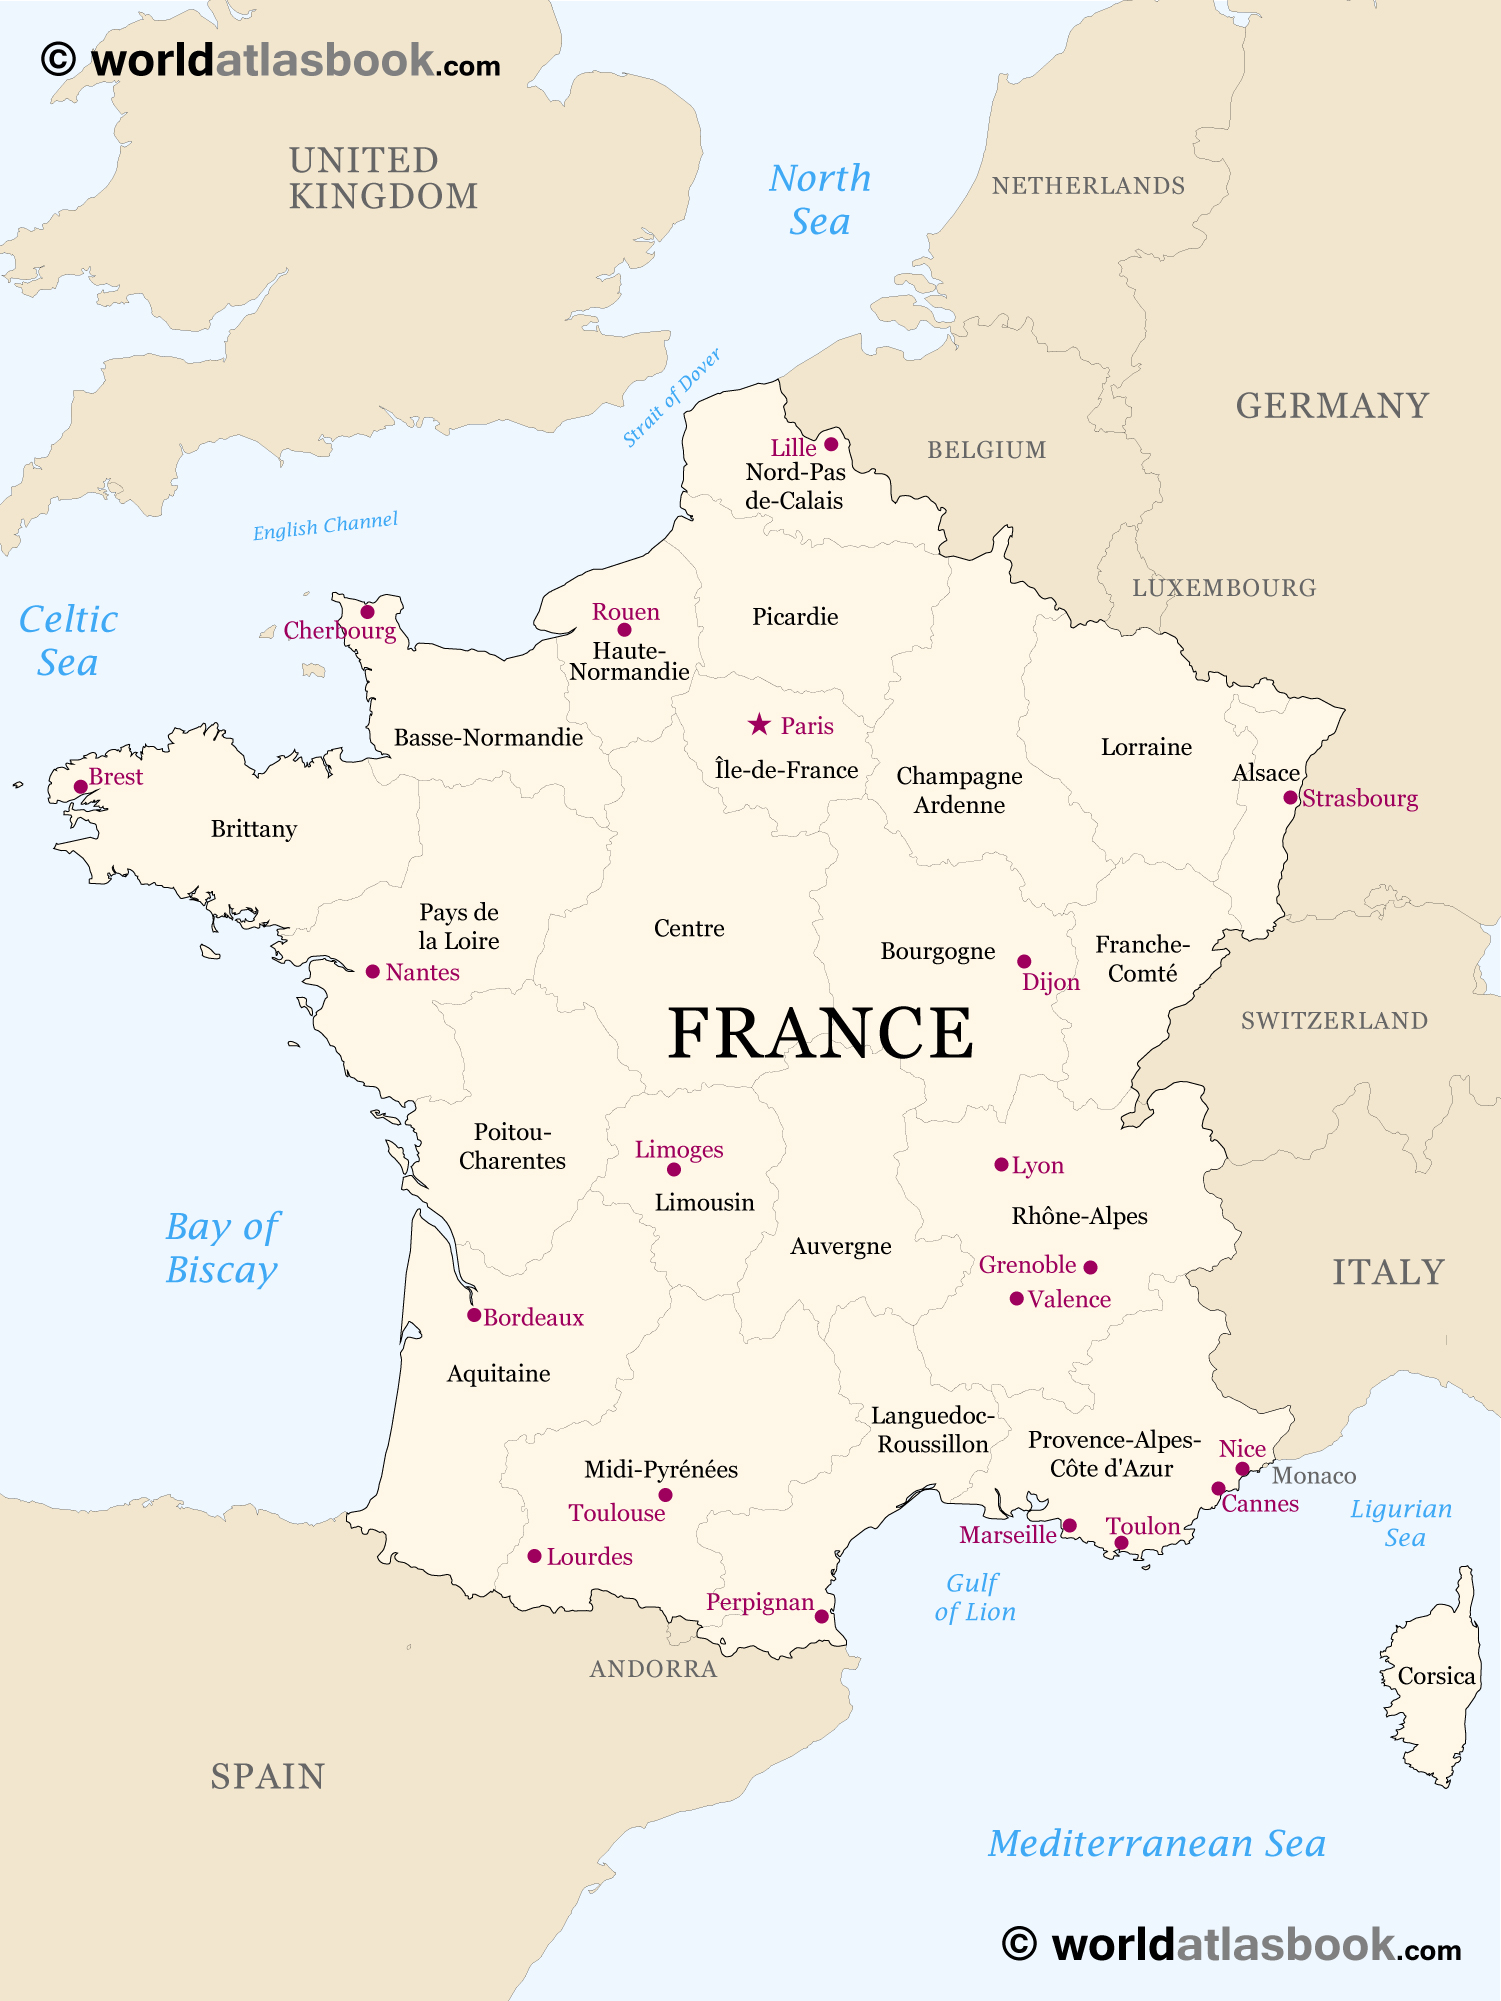 6 Best Images of Large Printable Map Of France - Free Printable France ...